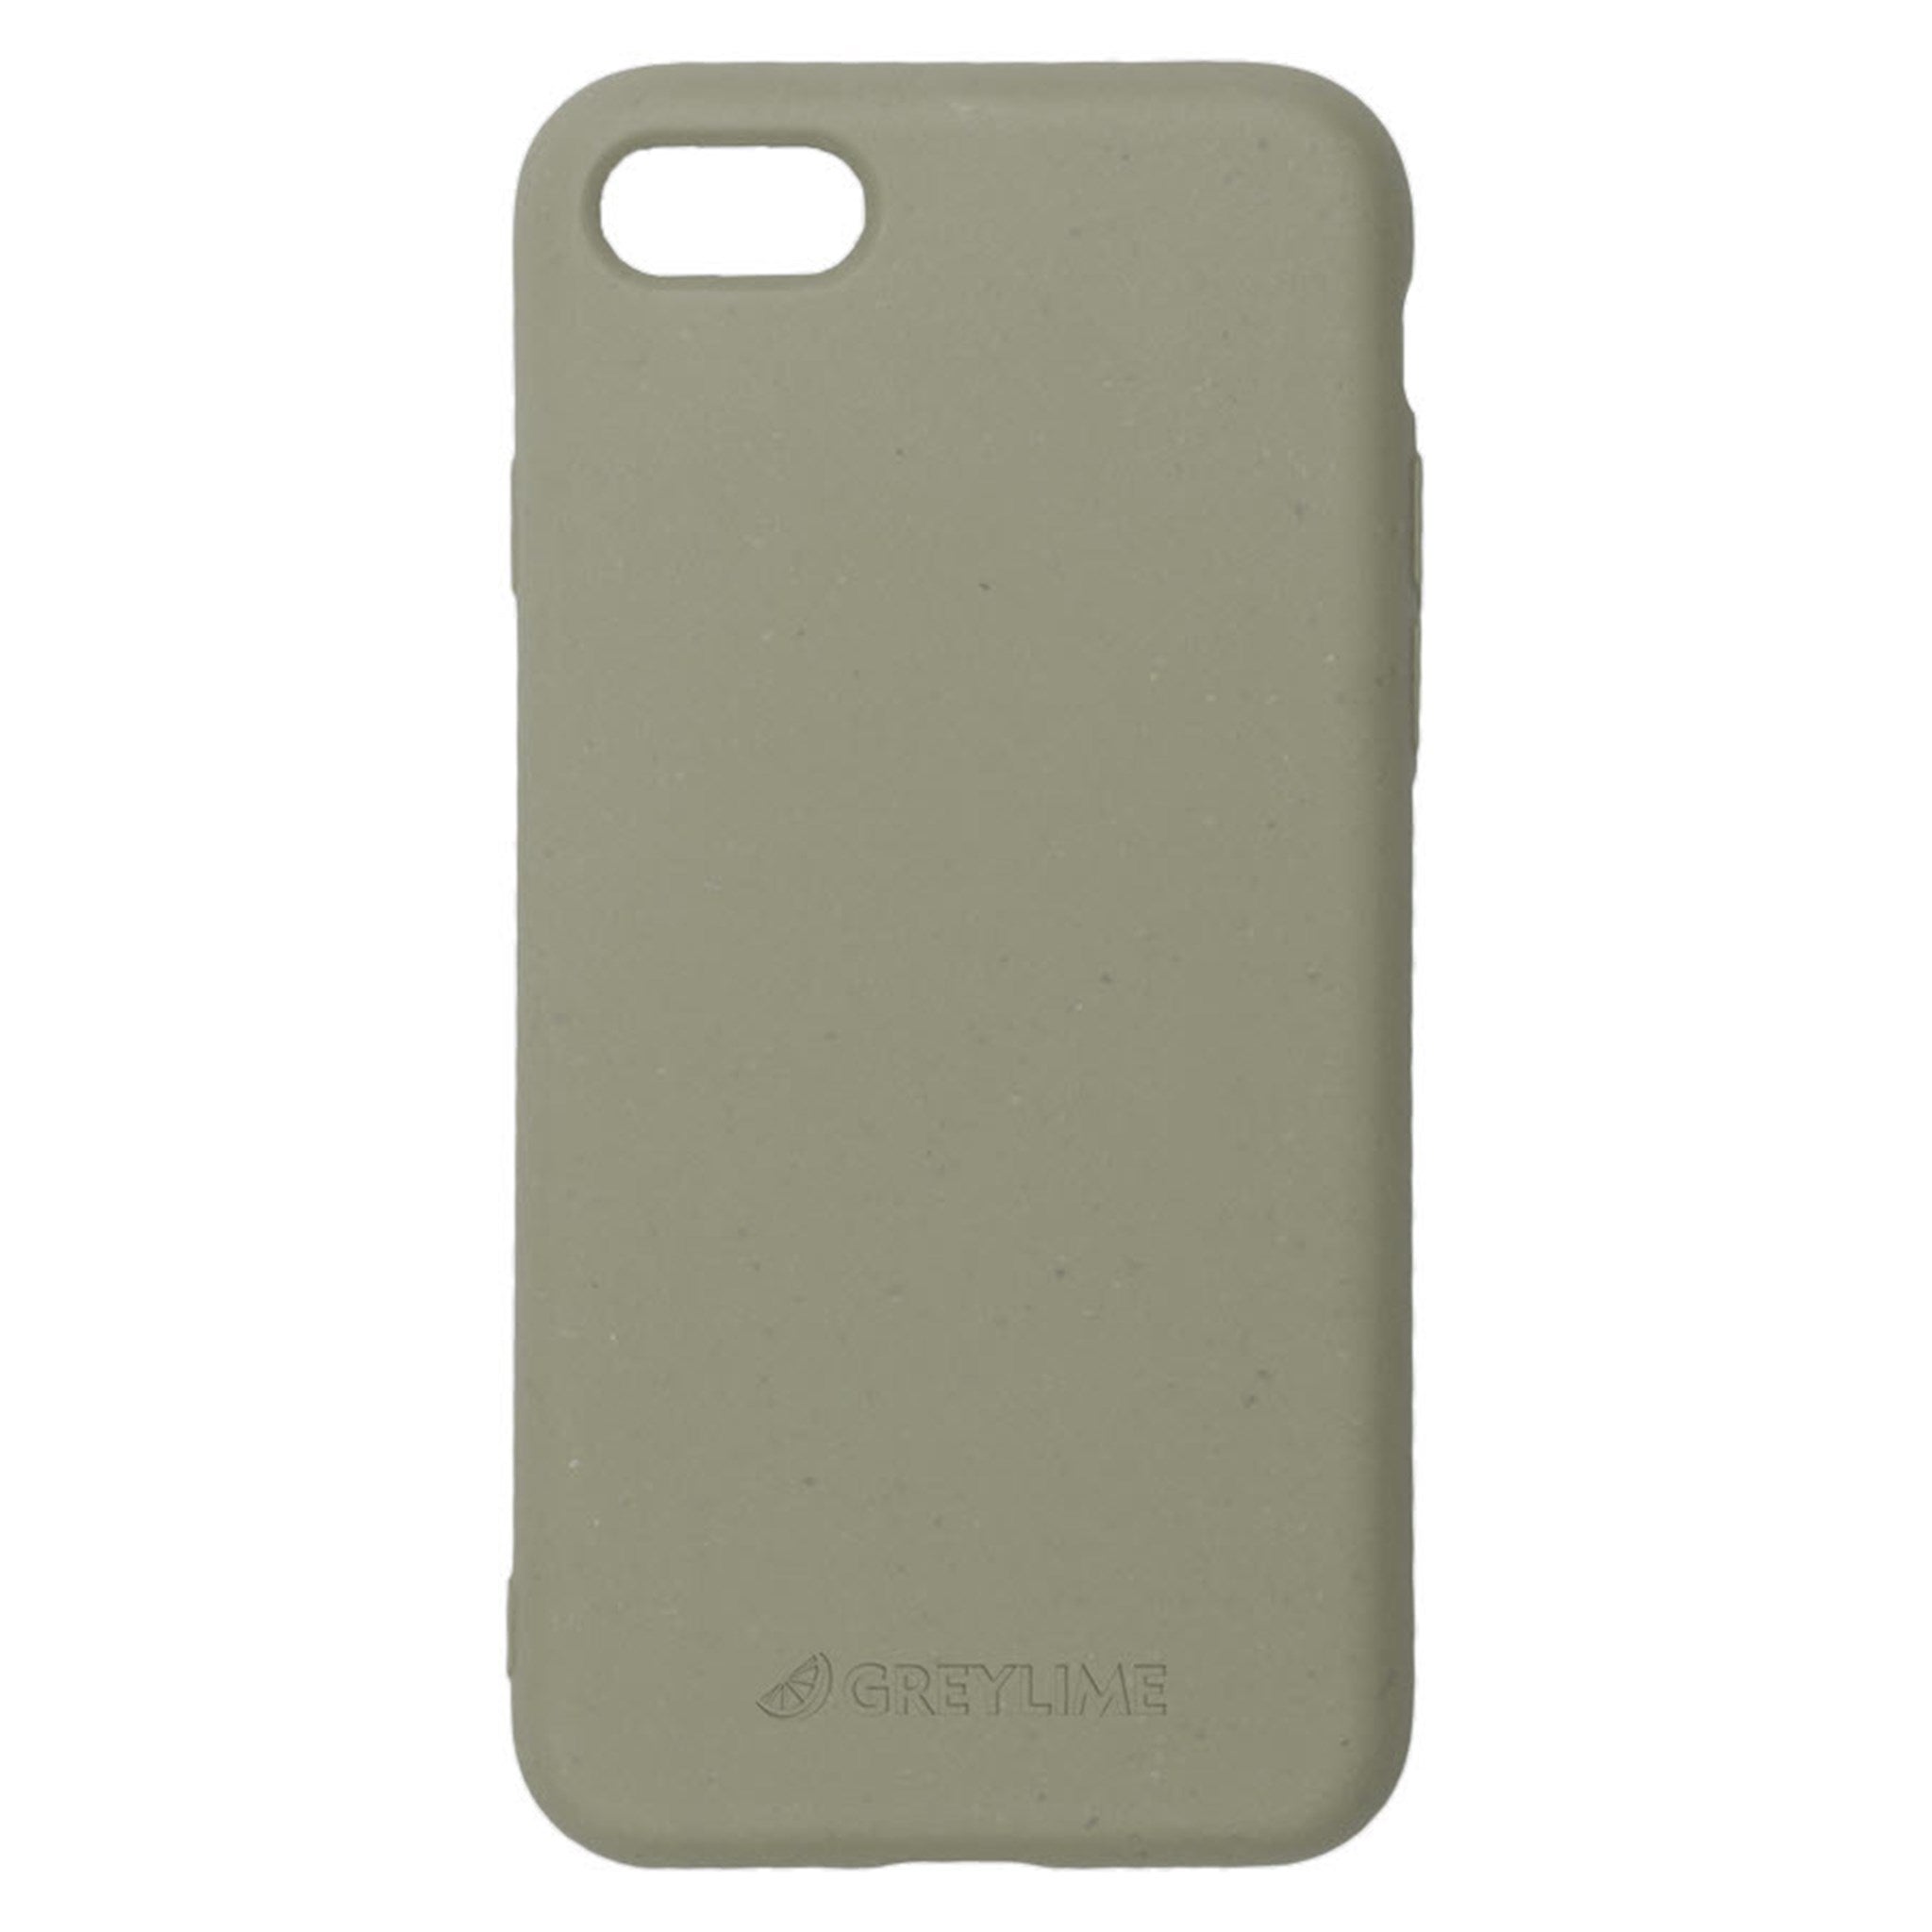 COIP67809-GreyLime_iPhone_6-7-8-SE_Biodegradable_Cover_Green_01.jpg